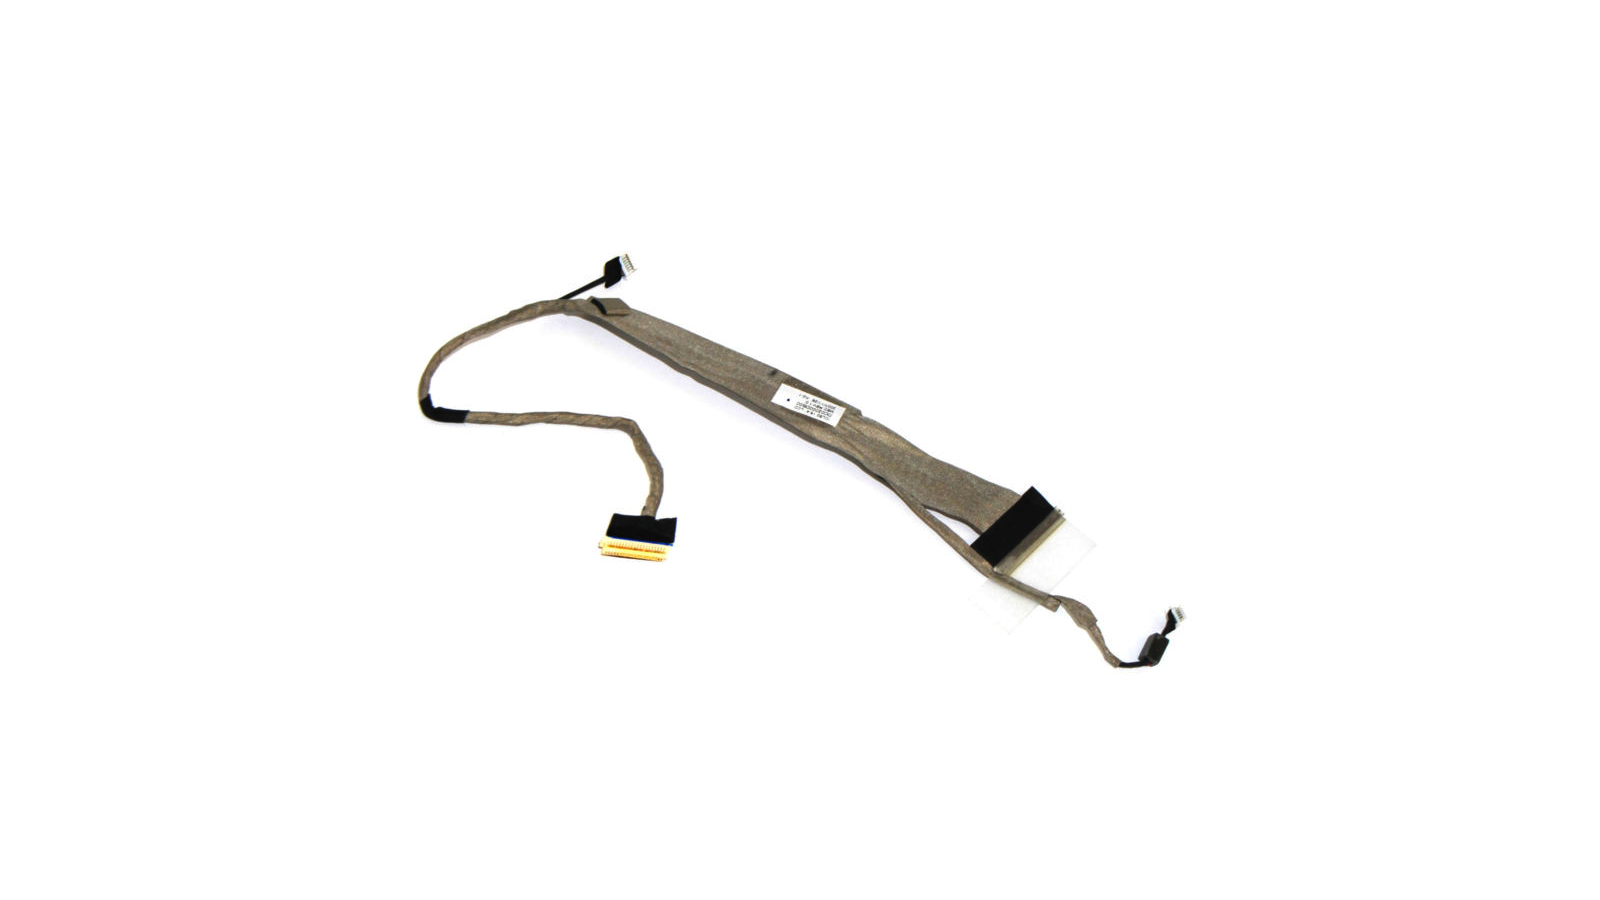 Cavo connessione flat display Acer Aspire 5720 5520 5310 5710